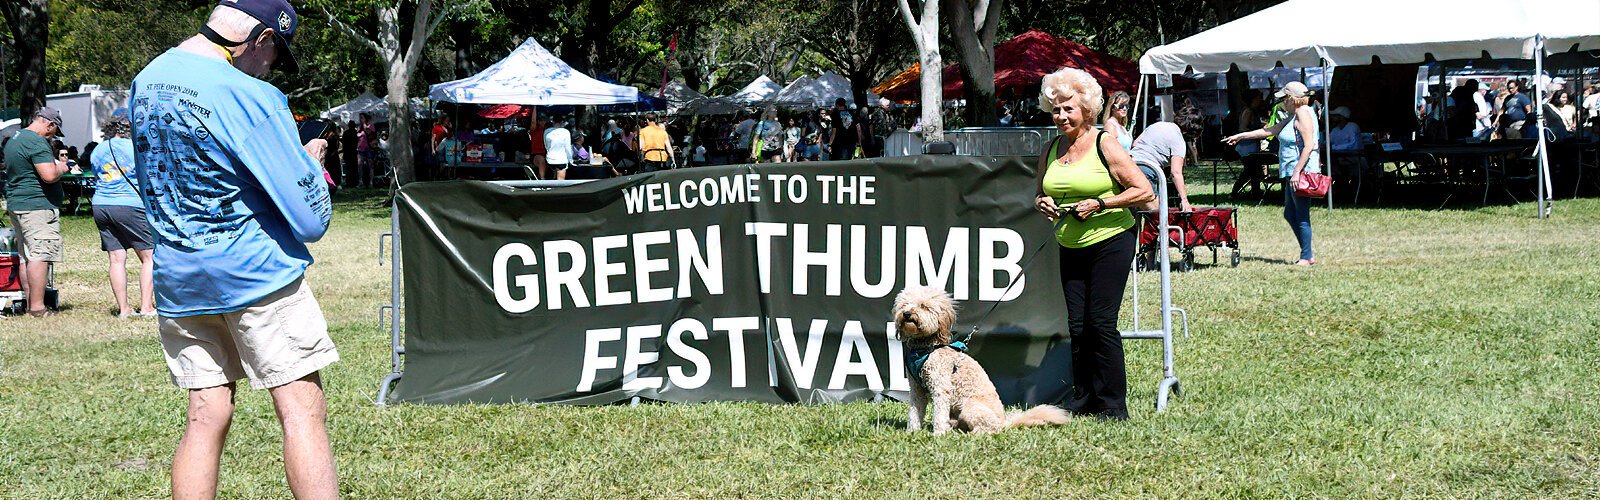 The Green Thumb Festival, St. Petersburg’s annual Arbor Day celebration, brings together plant lovers at Walter Fuller Park, as well as anyone looking for a fun weekend..